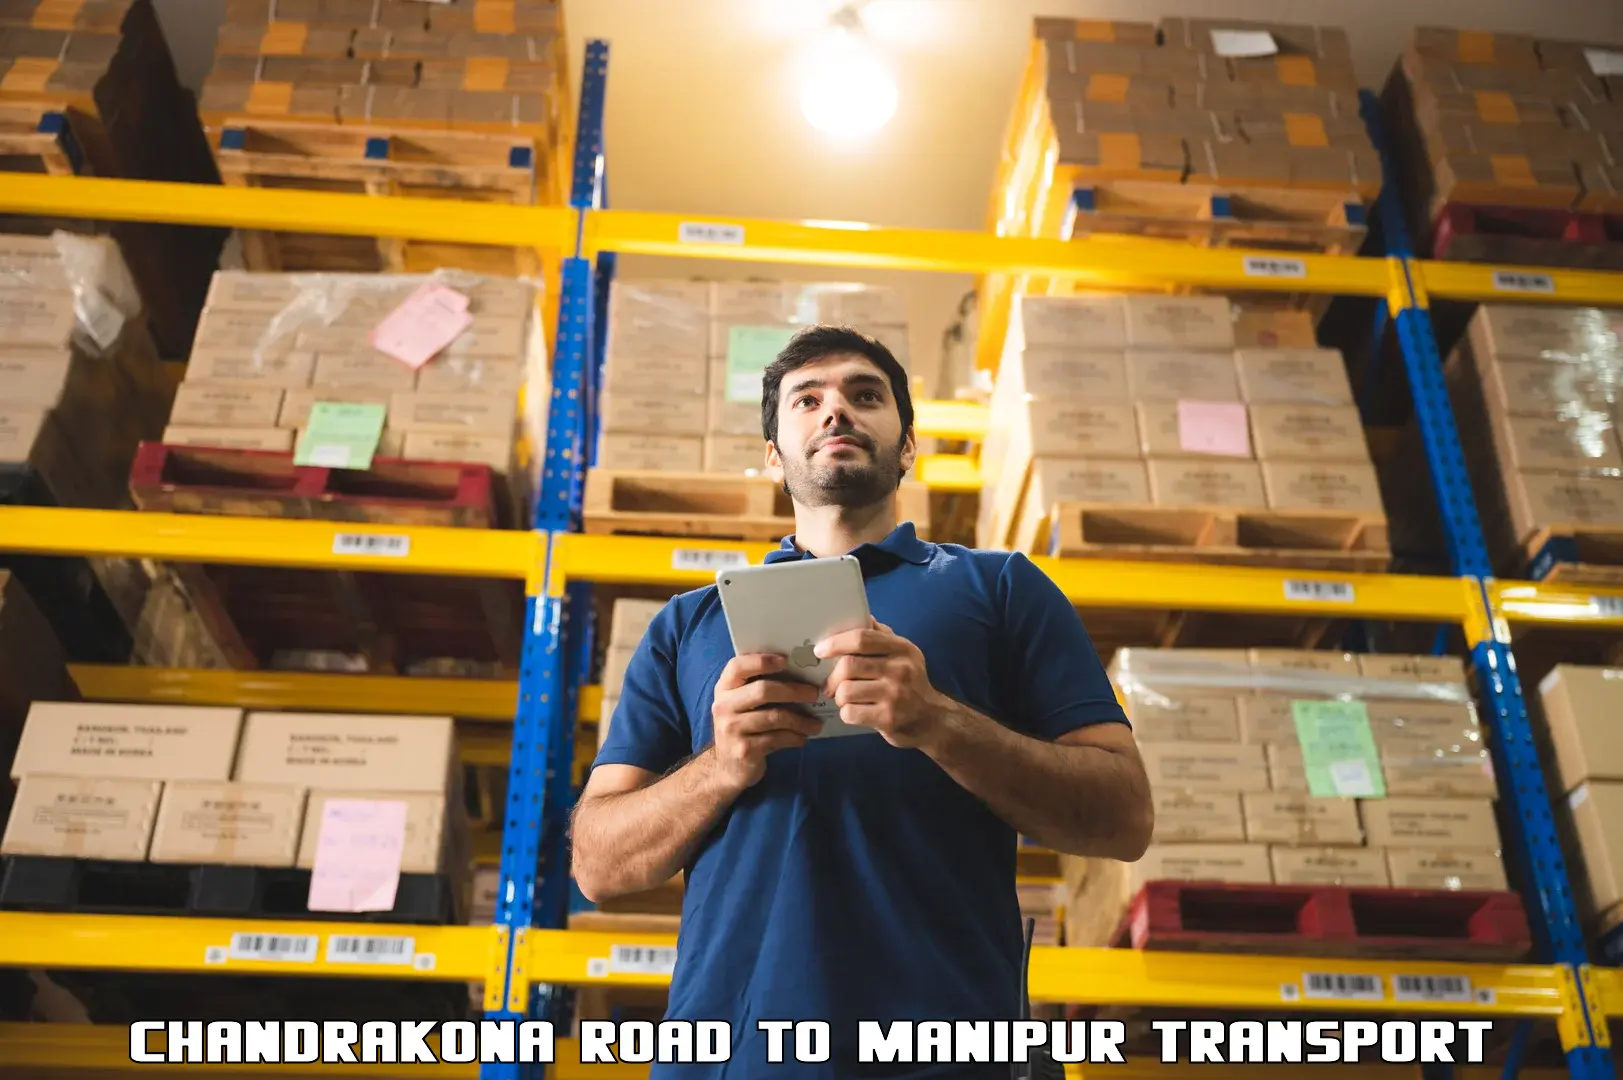 Air freight transport services Chandrakona Road to Kanti